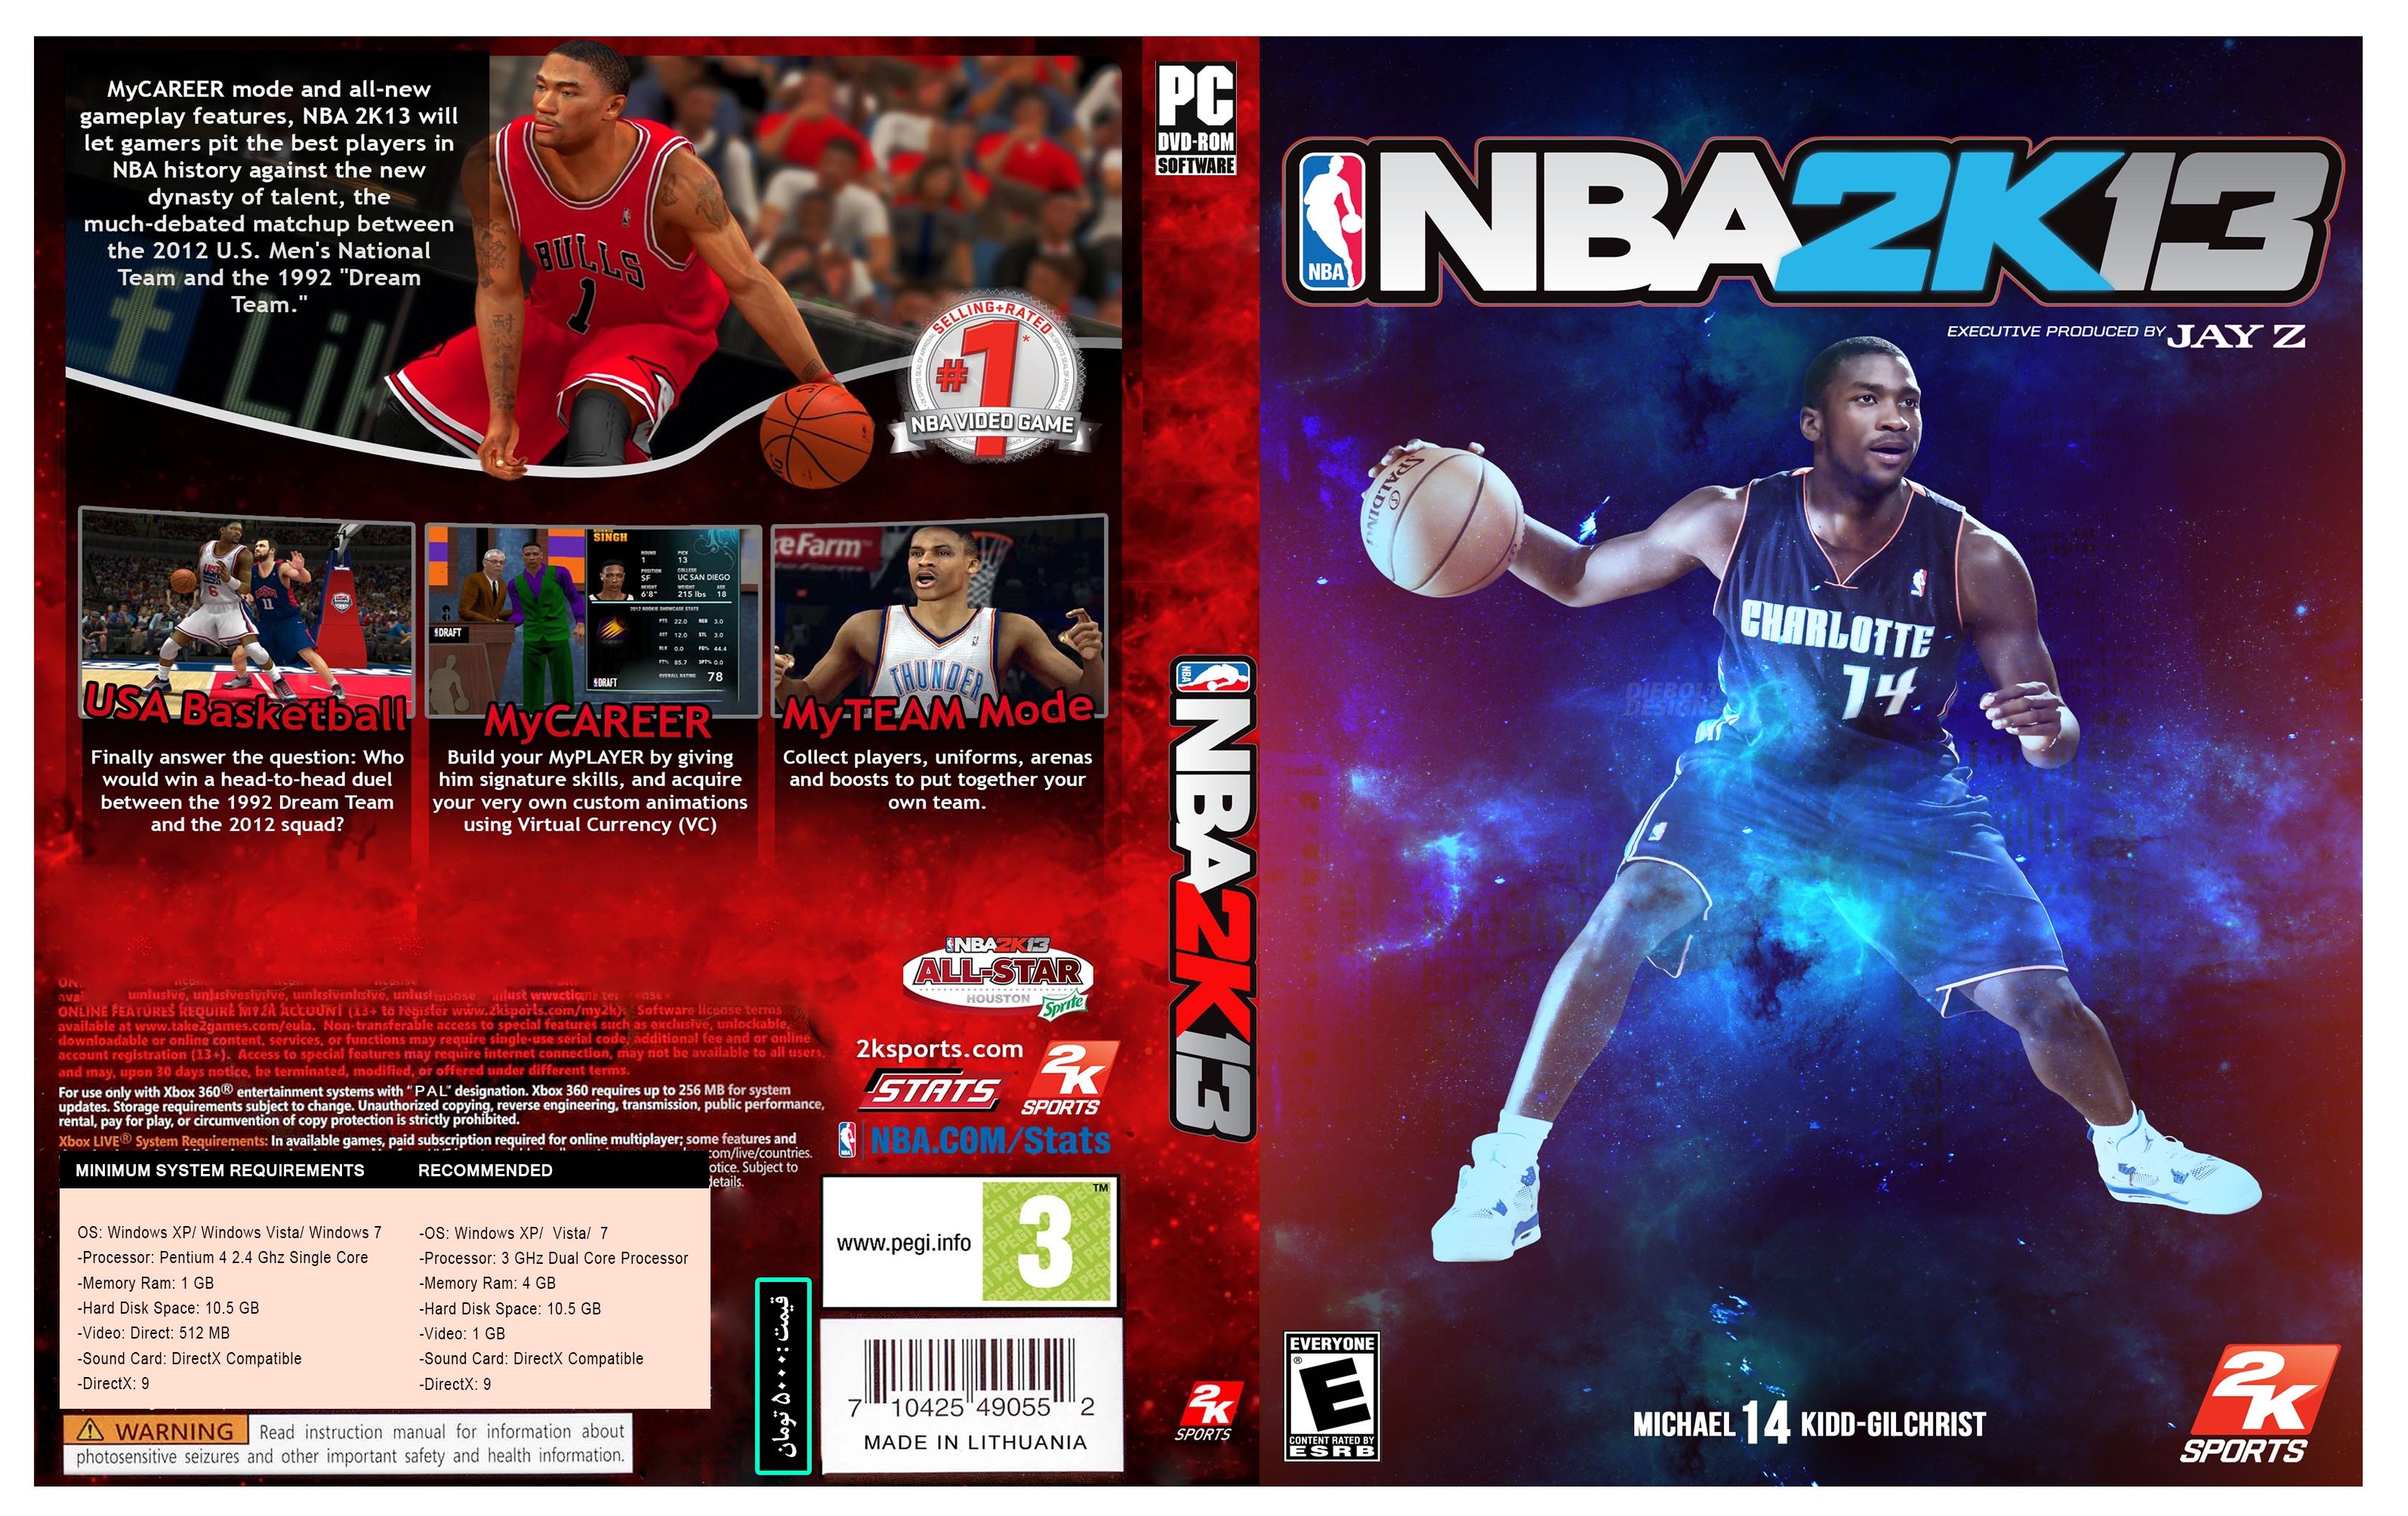 NBA 2K13 cover or packaging material - MobyGames